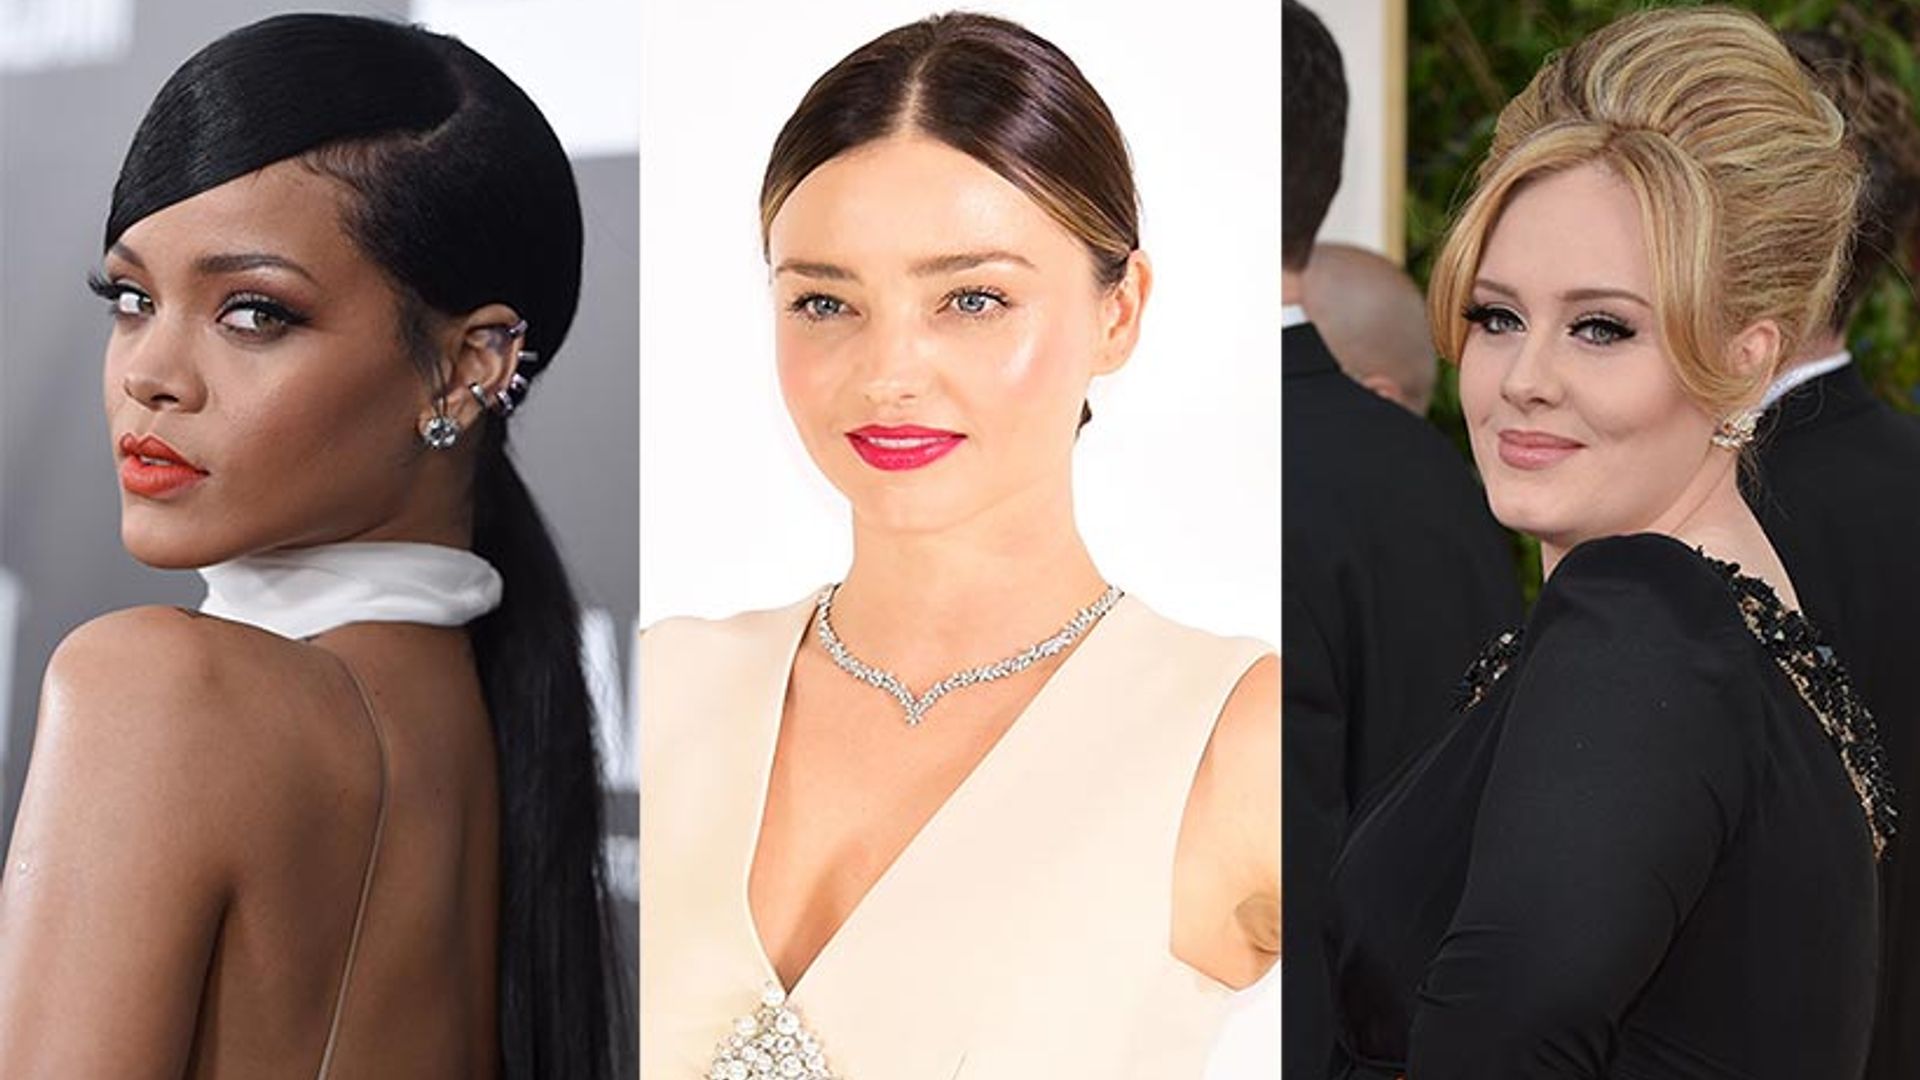 Party season hairstyles you can master at home